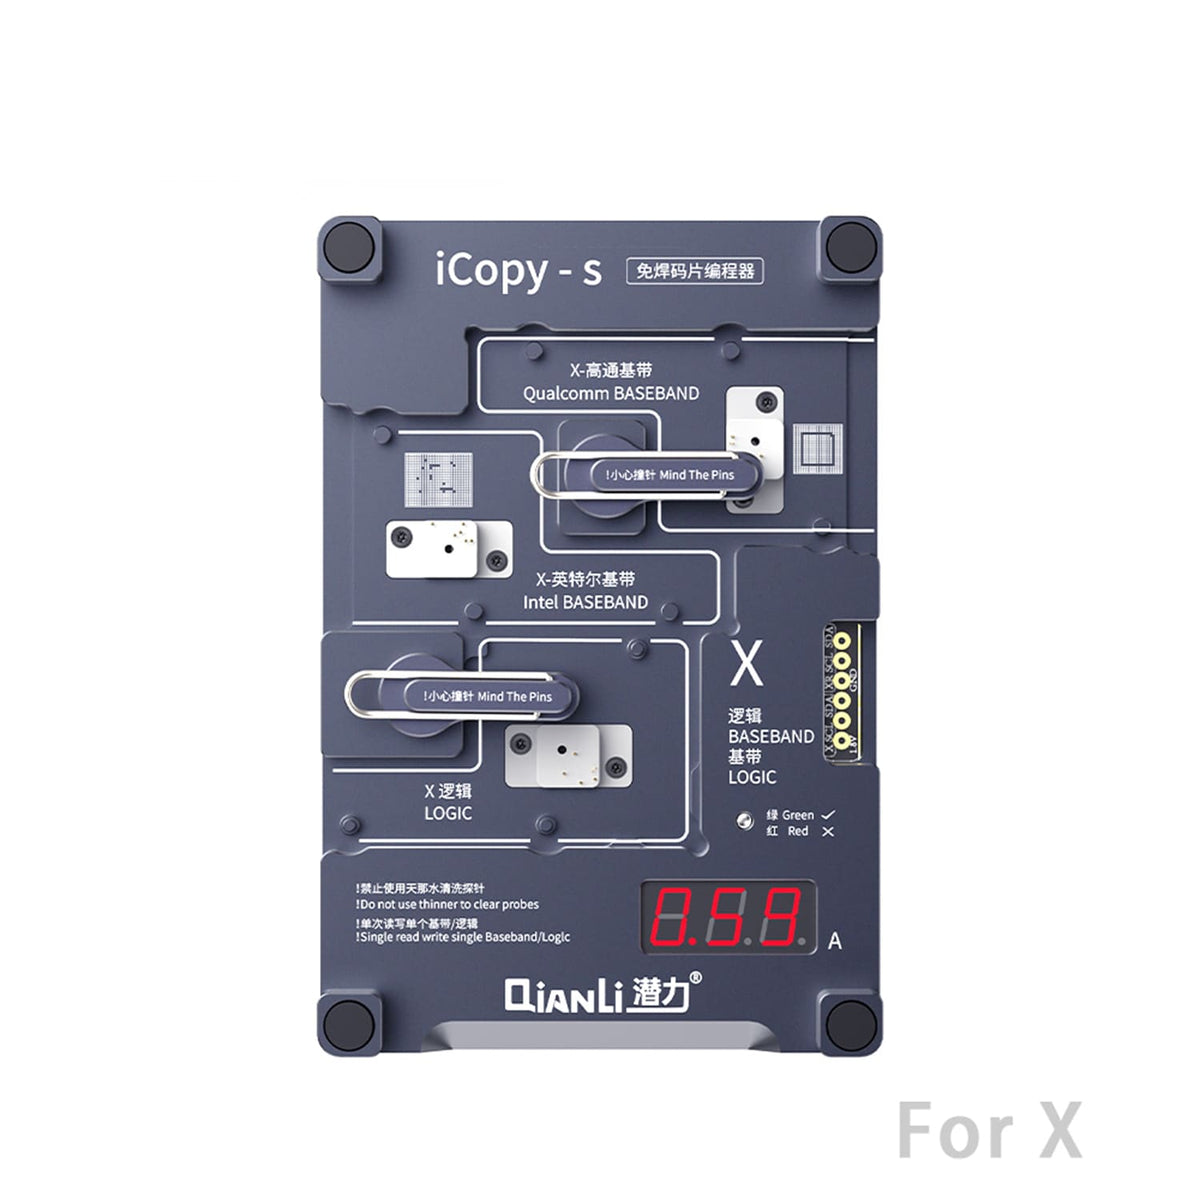 TOOLPLUS QIANLI ICOPY-S DOUBLE - SIDED 4IN1 LOGIC BASEBAND EEPROM CHIP NON-REMOVAL FOR IPHONE X/XR/XS/XSMAX